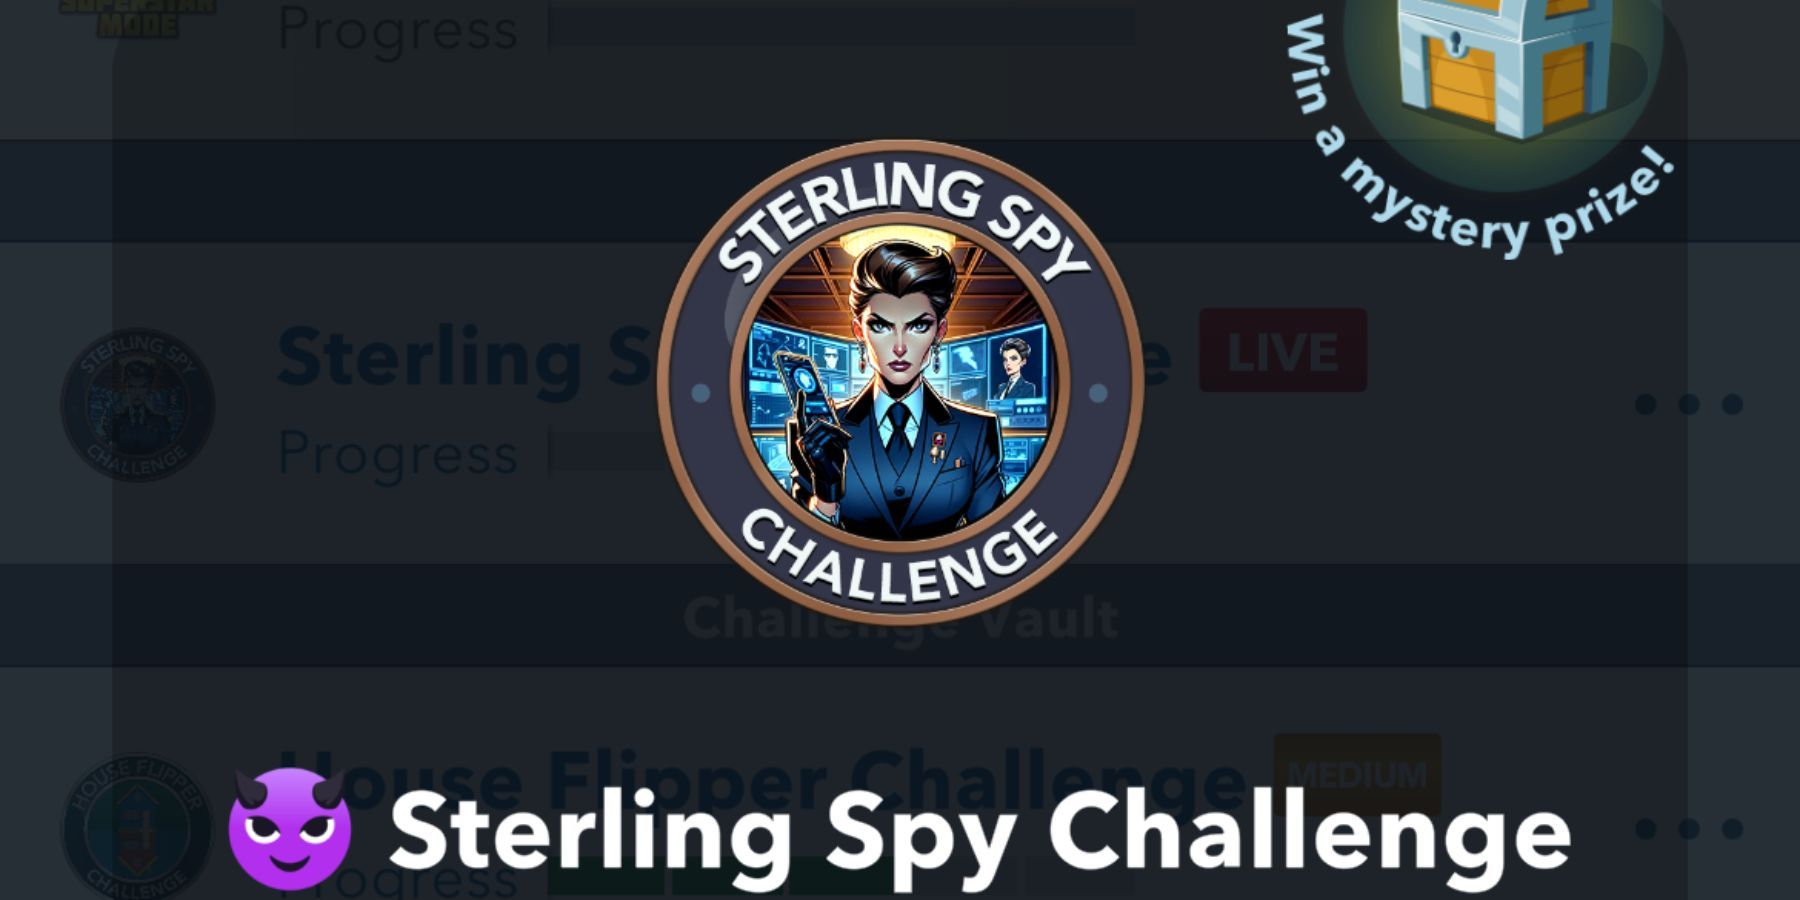 How to Complete the Sterling Spy Challenge in Biflife